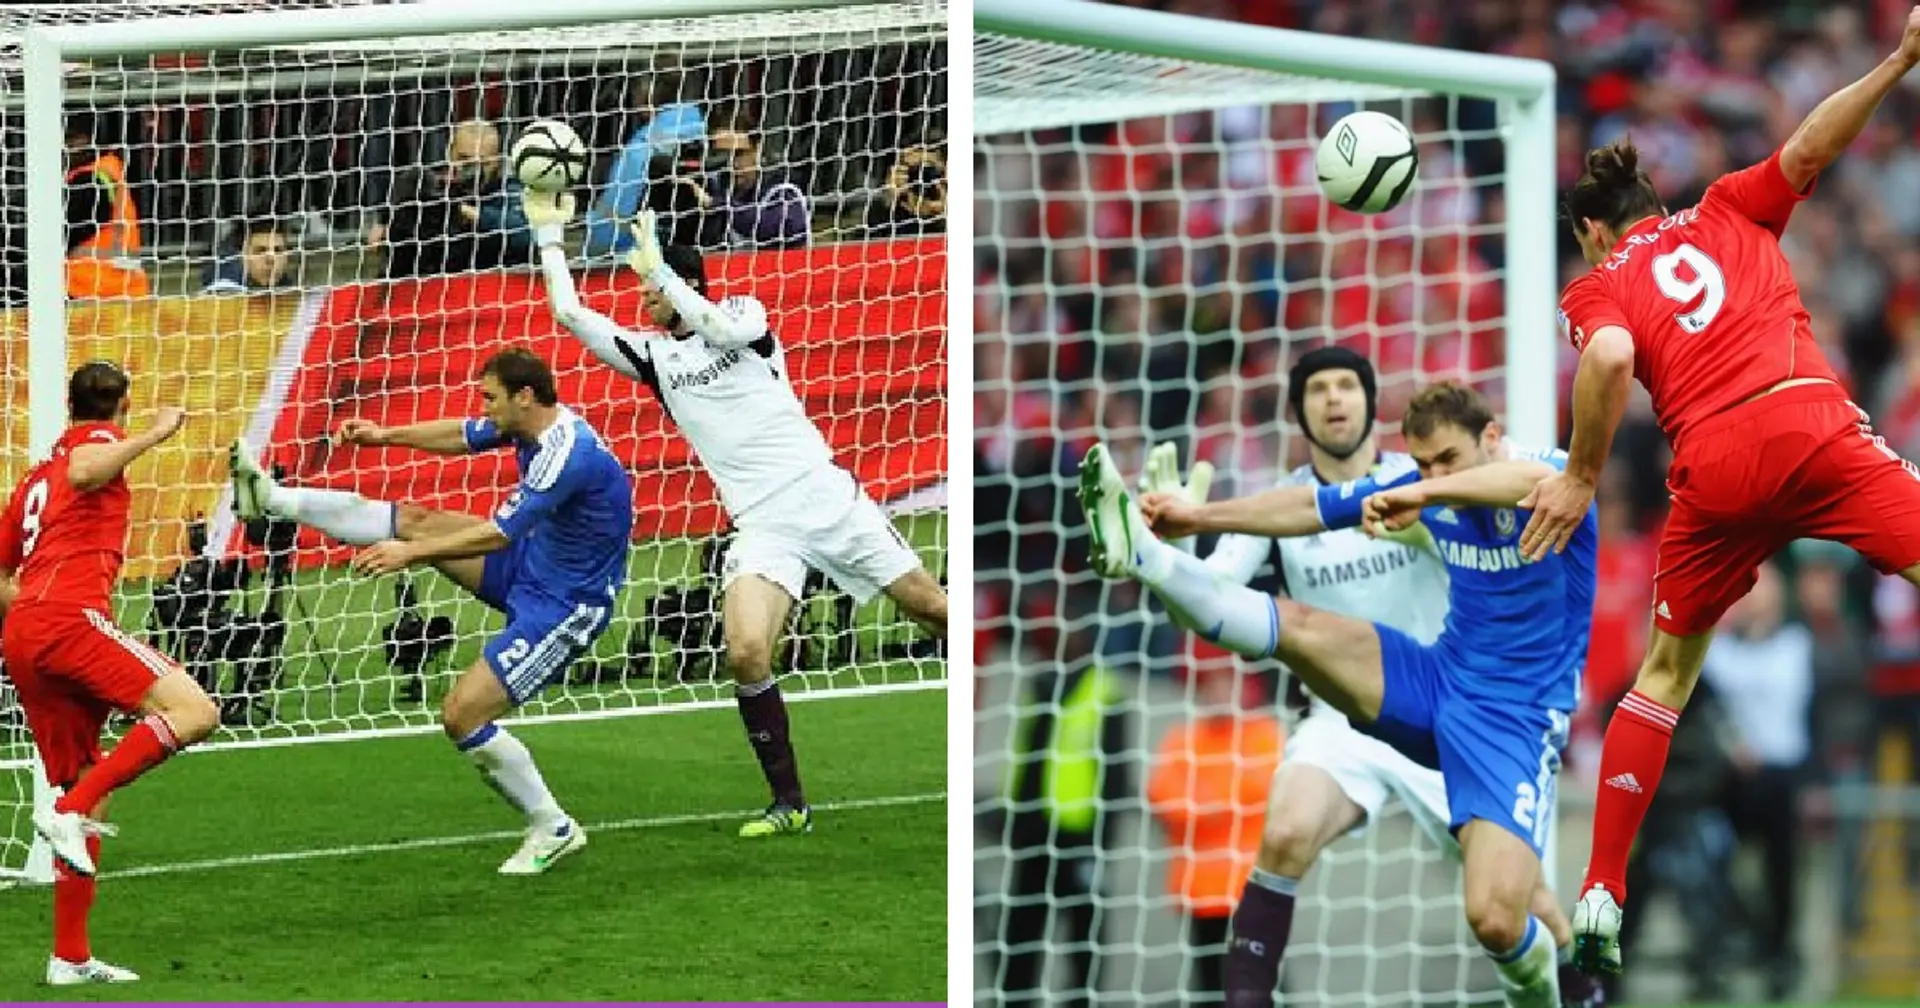 'Had this gone in, we would have lost the game': Cech breaks down one of his greatest saves ever in FA Cup final